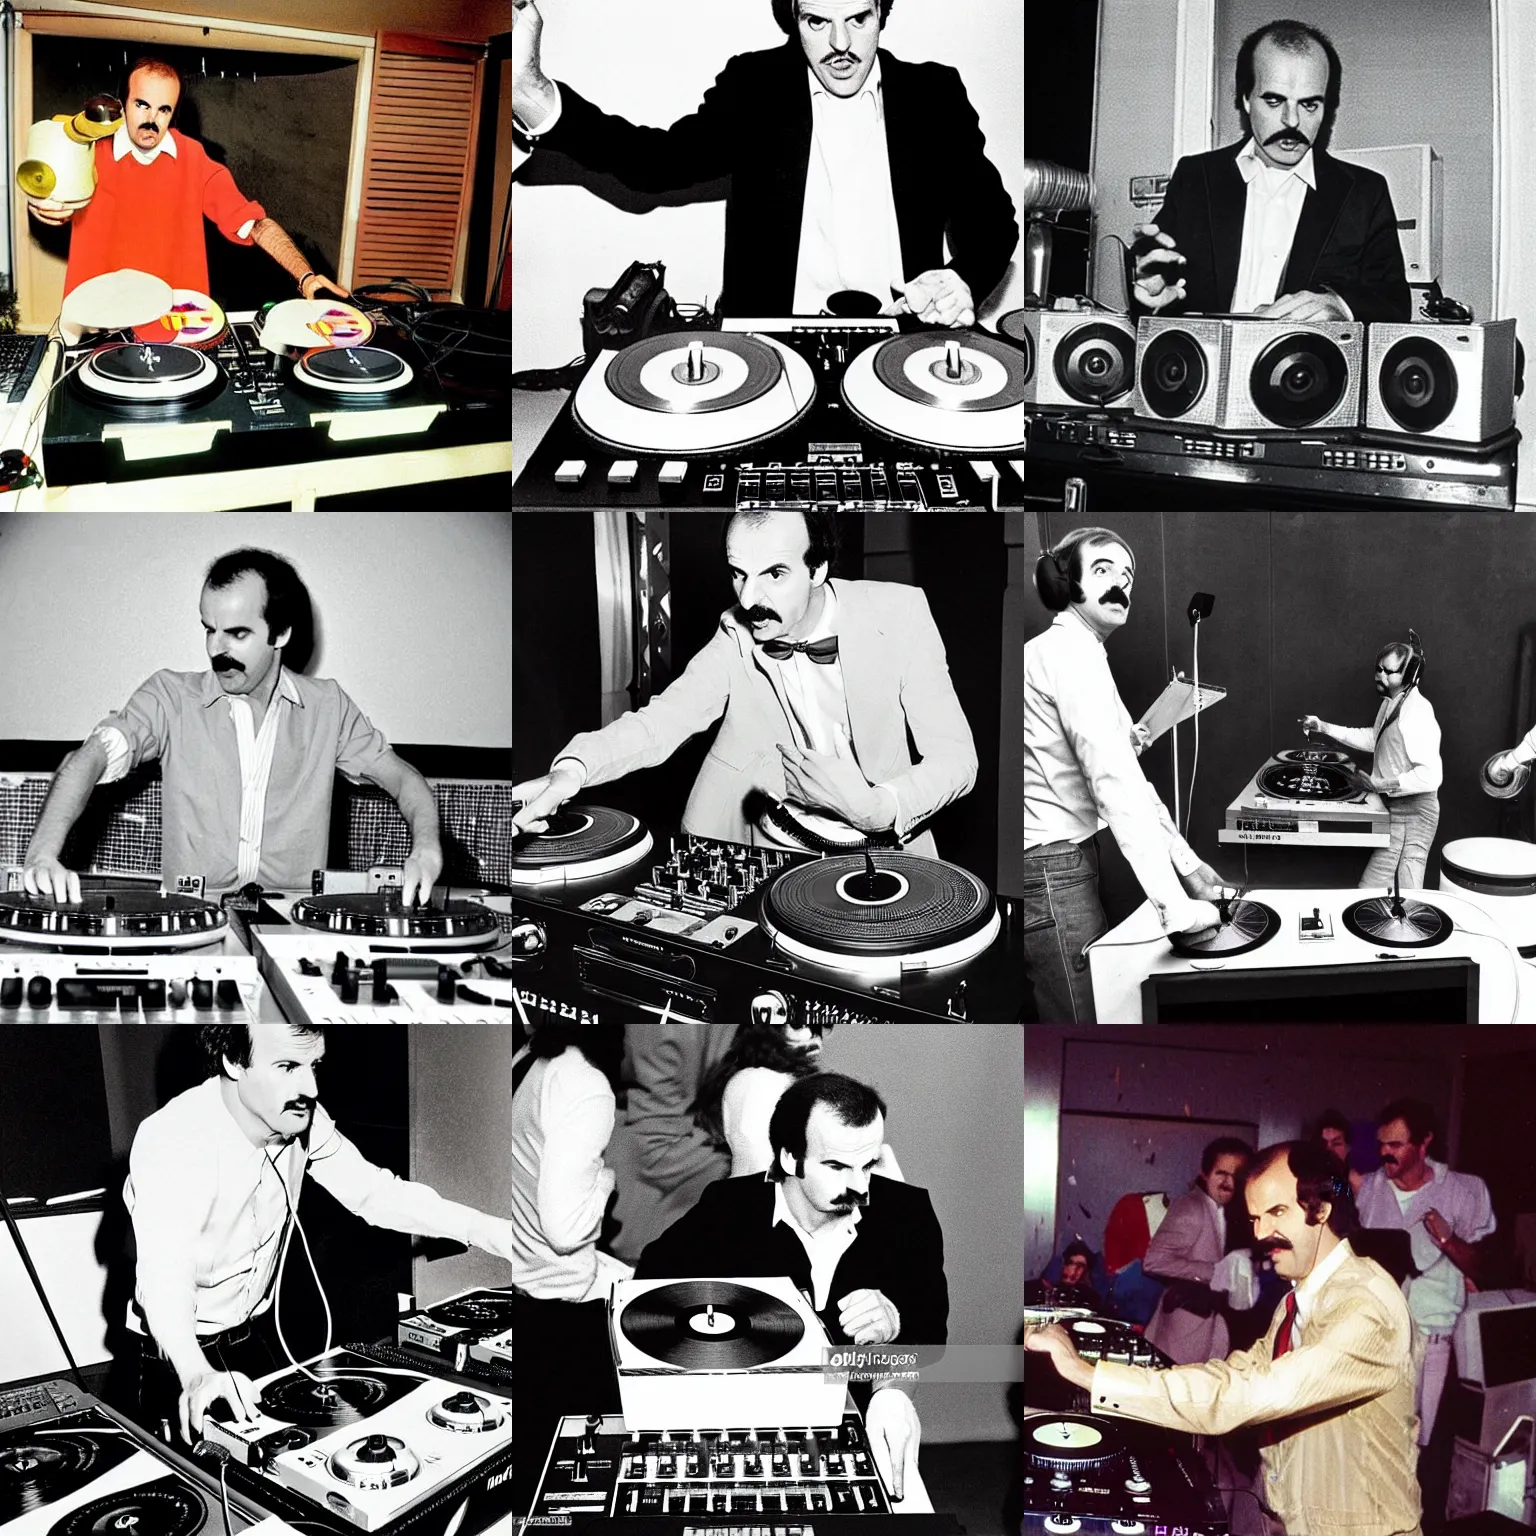 Prompt: basil fawlty DJing with DJ turntables, 70s photograph